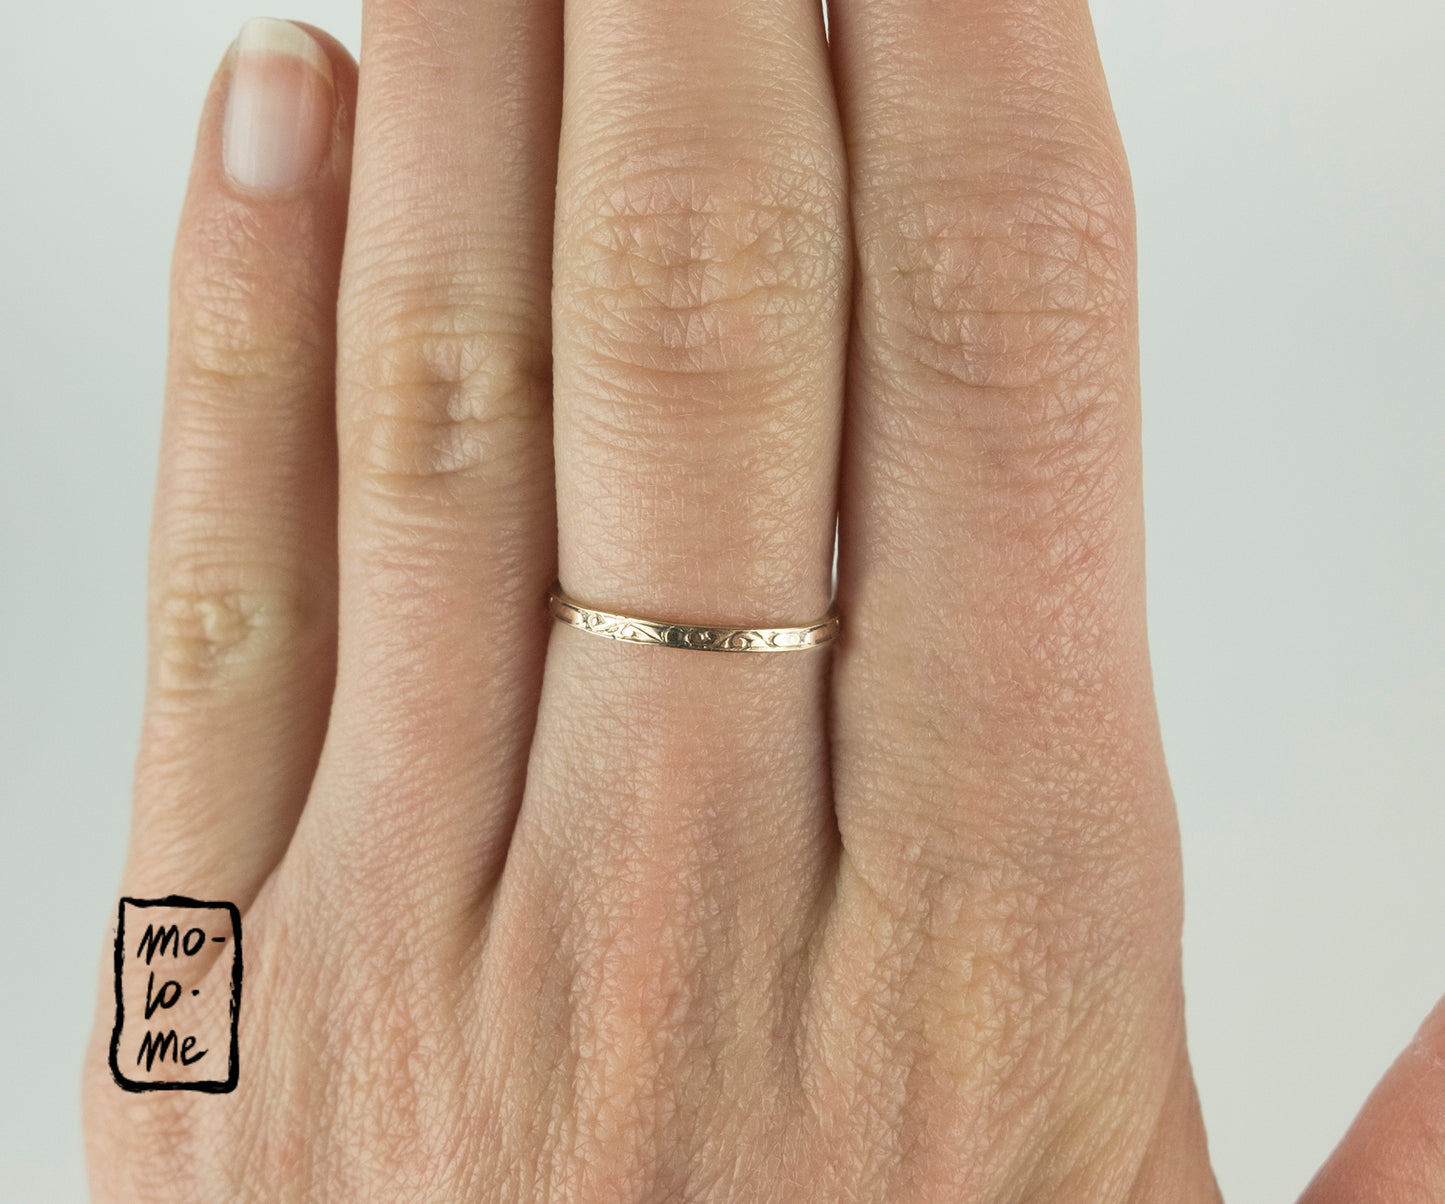 Vintage Skinny Engraved Gold-Plated Stacking Rings by Molo Me on a model